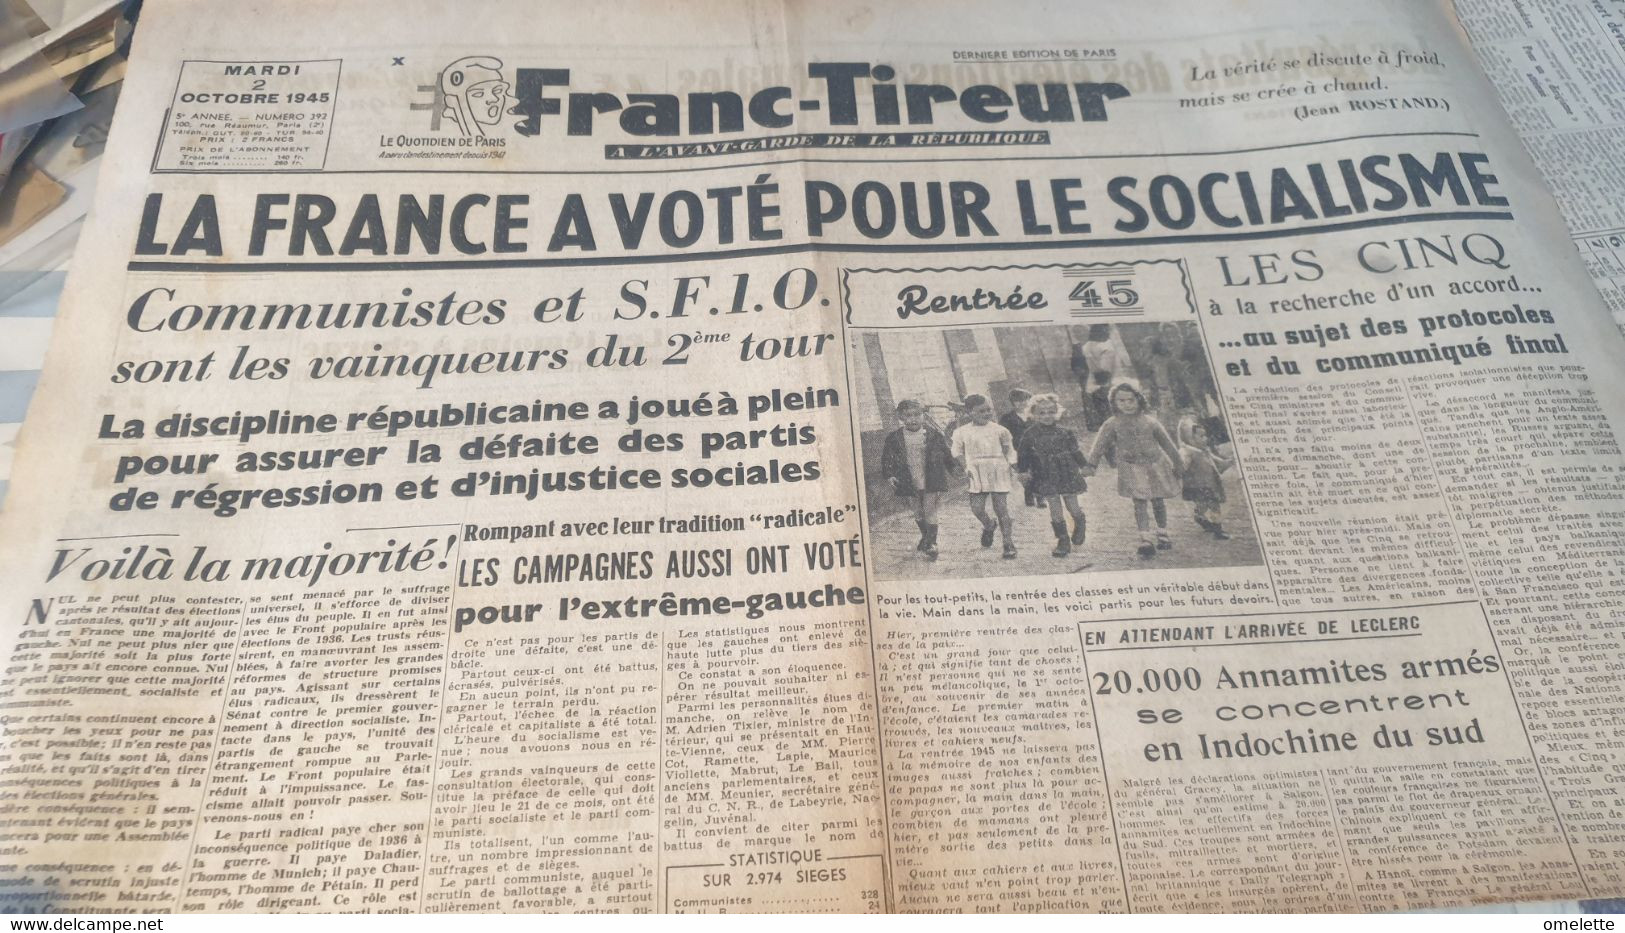 FRANC TIREUR 45/FRANCE VOTE SOCIALISME /INDOCHINE /TOULOUSE 12 P.P.F CONDAMNES/RESULTATS CANTONALES - General Issues